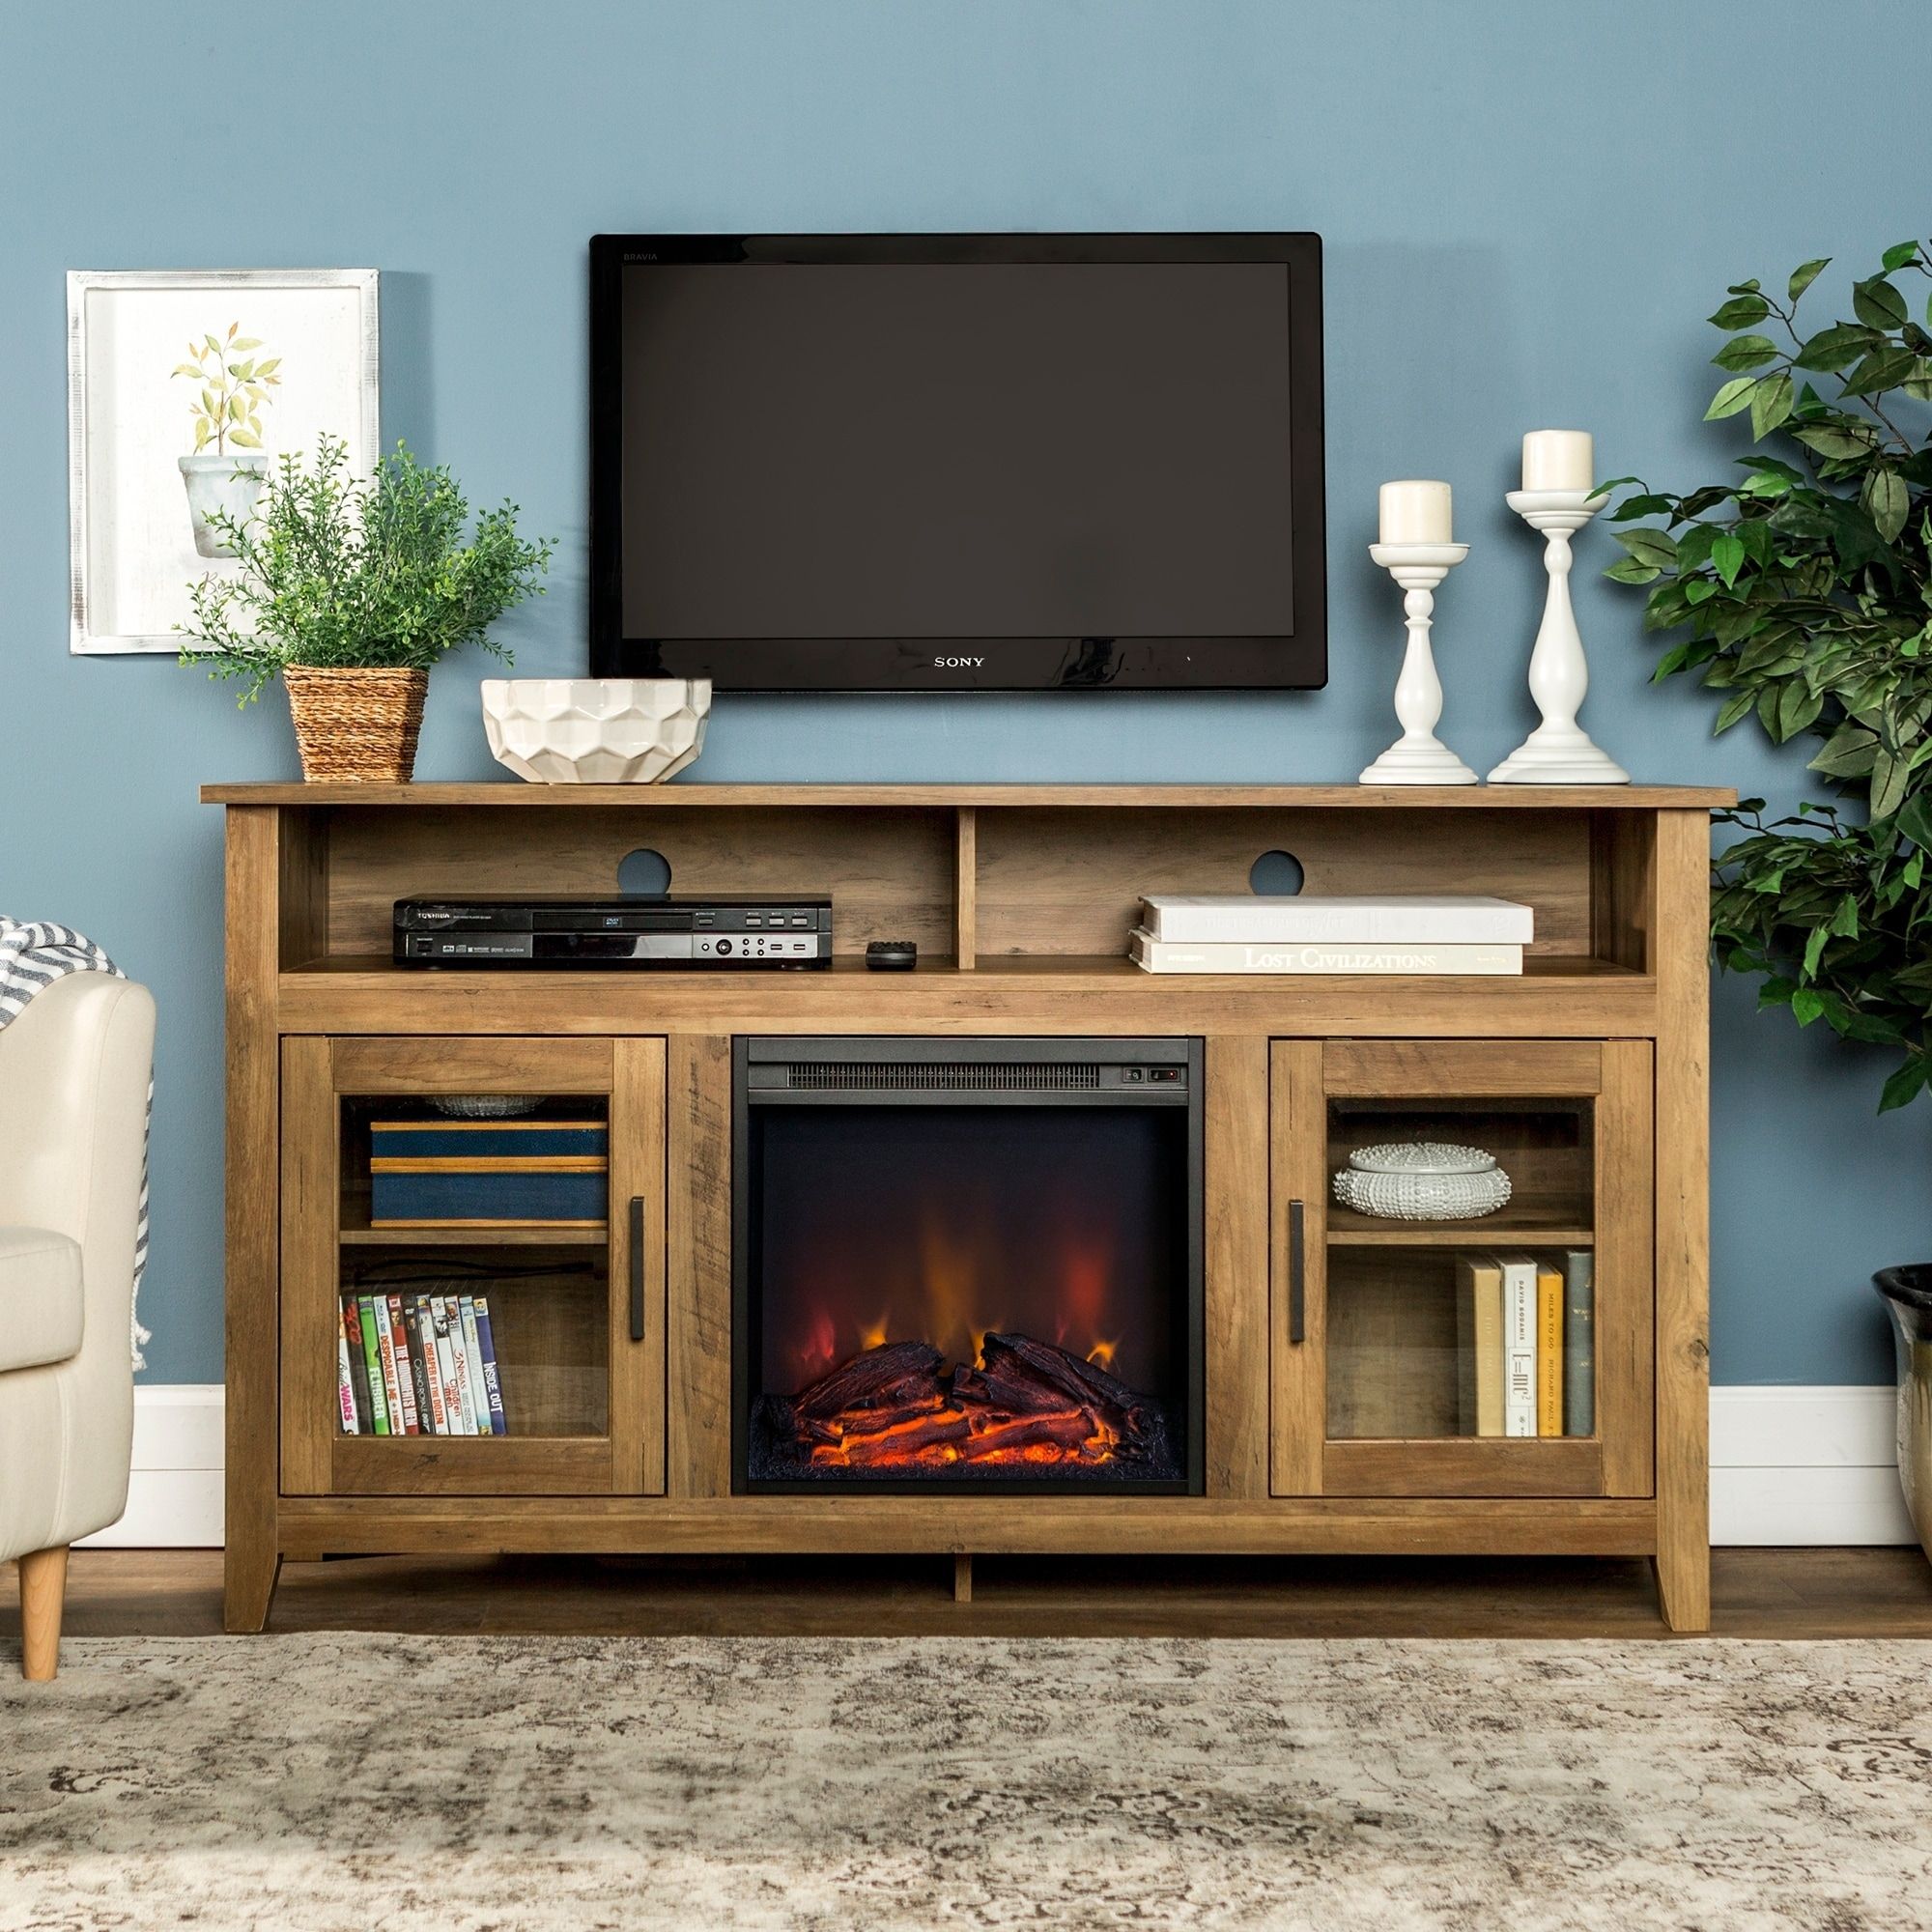 58 Inch Wood Highboy Fireplace Tv Stand – Rustic Oak (reclaimed Intended For Wood Highboy Fireplace Tv Stands (View 12 of 20)